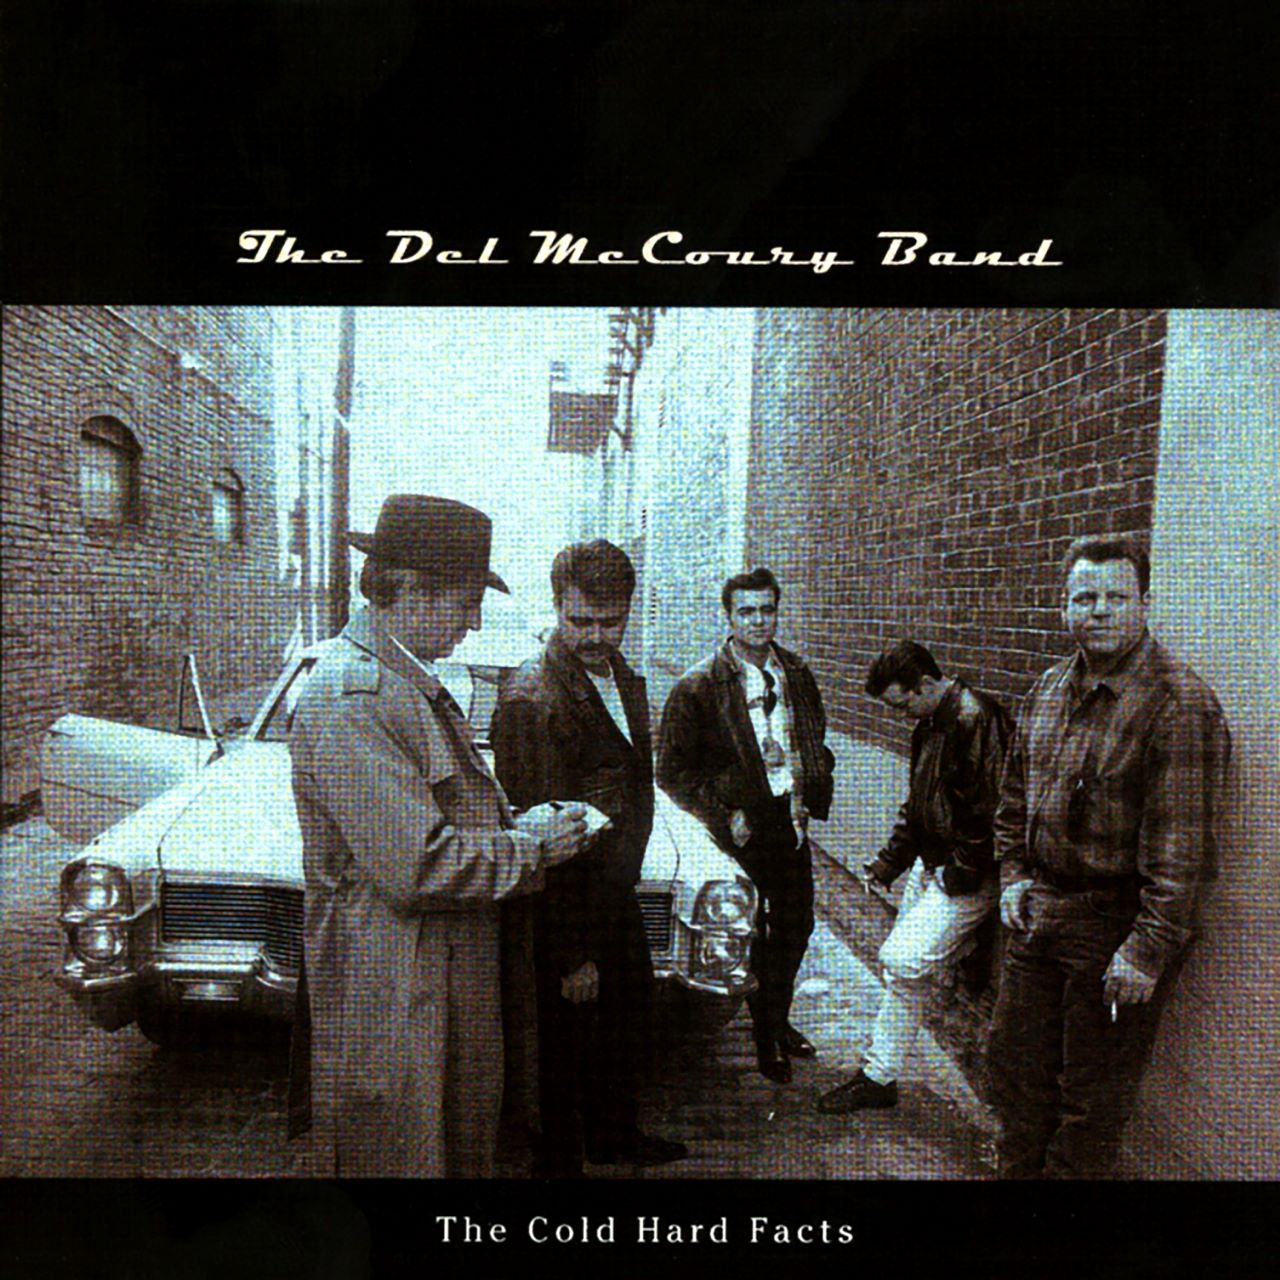 Del McCoury Band - The Cold Hard Facts cover album